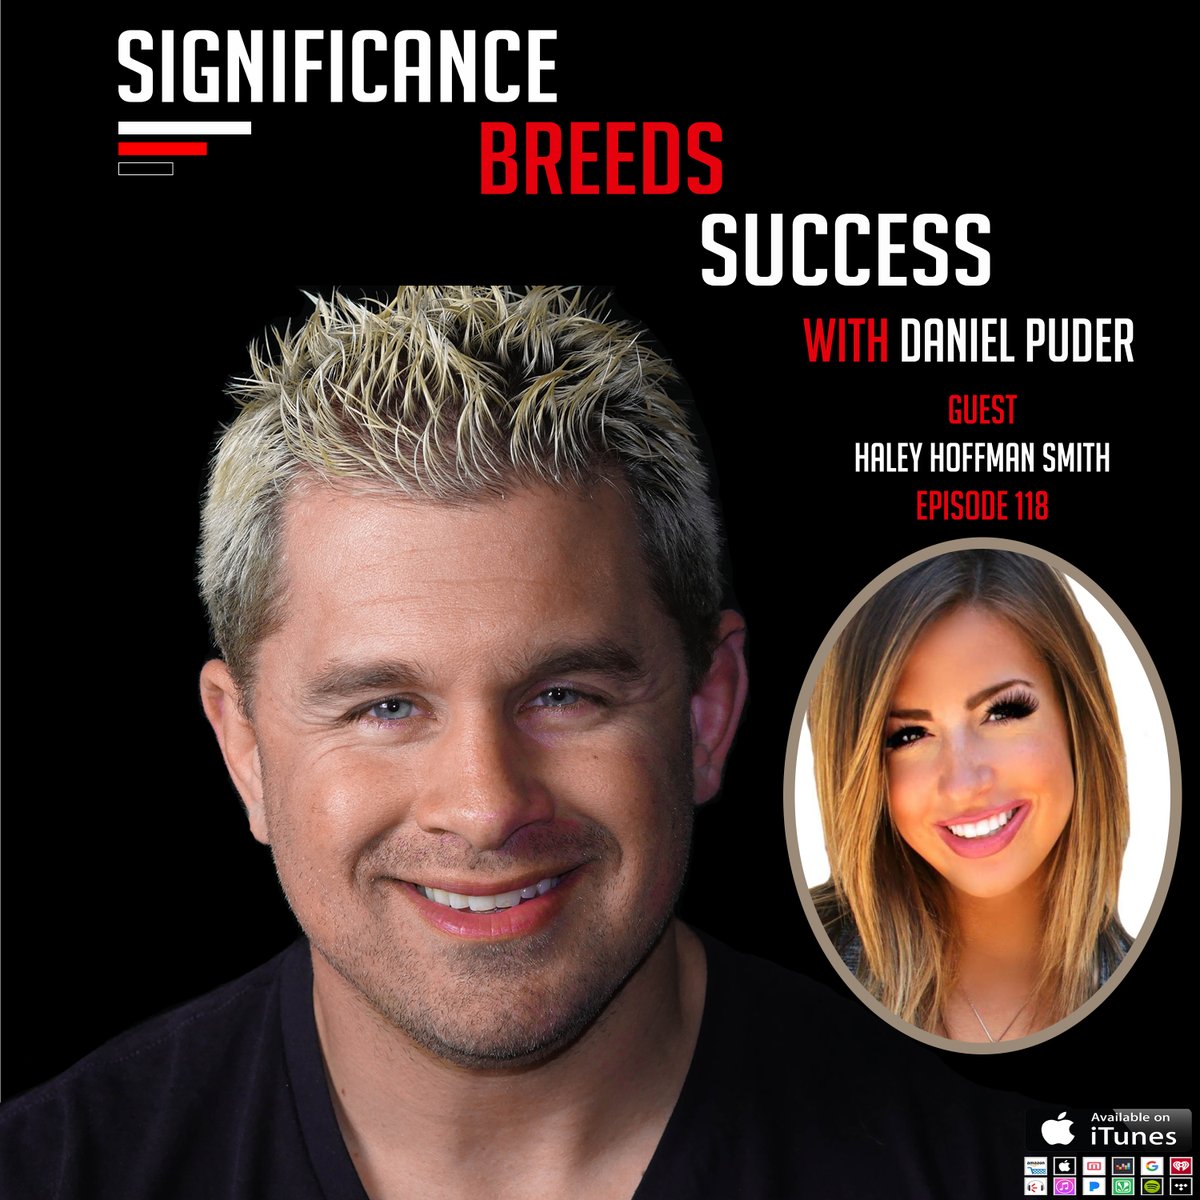 New Significance Breeds Success Episode: What is your motivation for success? w/ @Danielpuder & @haleyhoffsmith gopod.me/1402771331 | itunes.apple.com/us/podcast/sig… | wavve.link/SBSaction/epis… #itunes #spreaker #podcast #podcasts